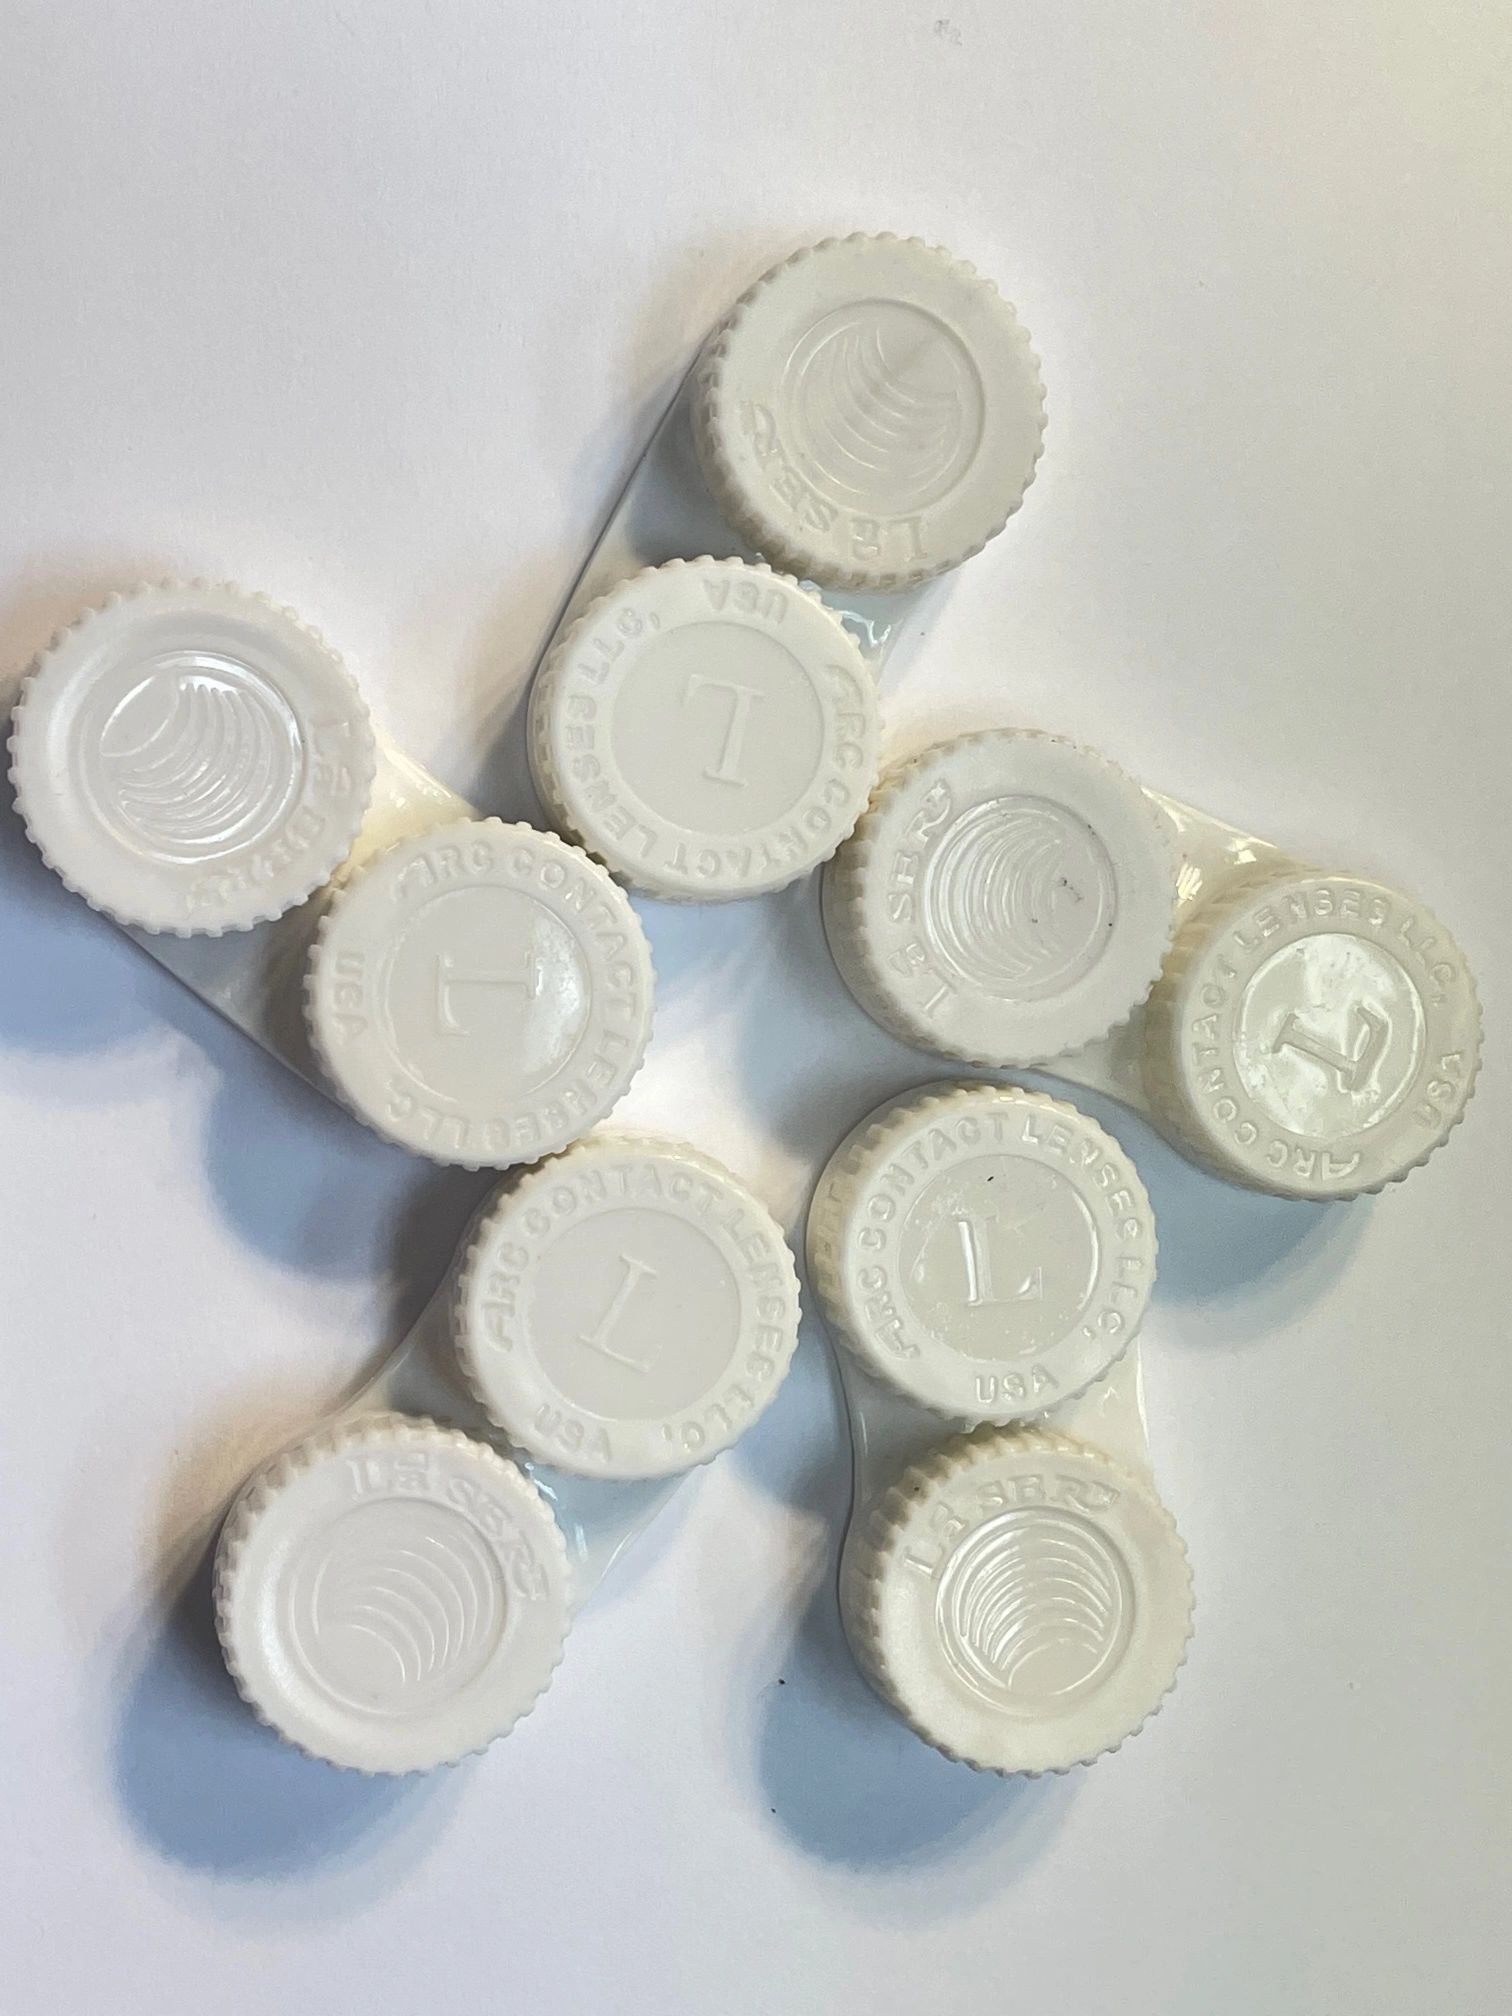 Contact lens Cases for soft, RGP and Scleral lenses 